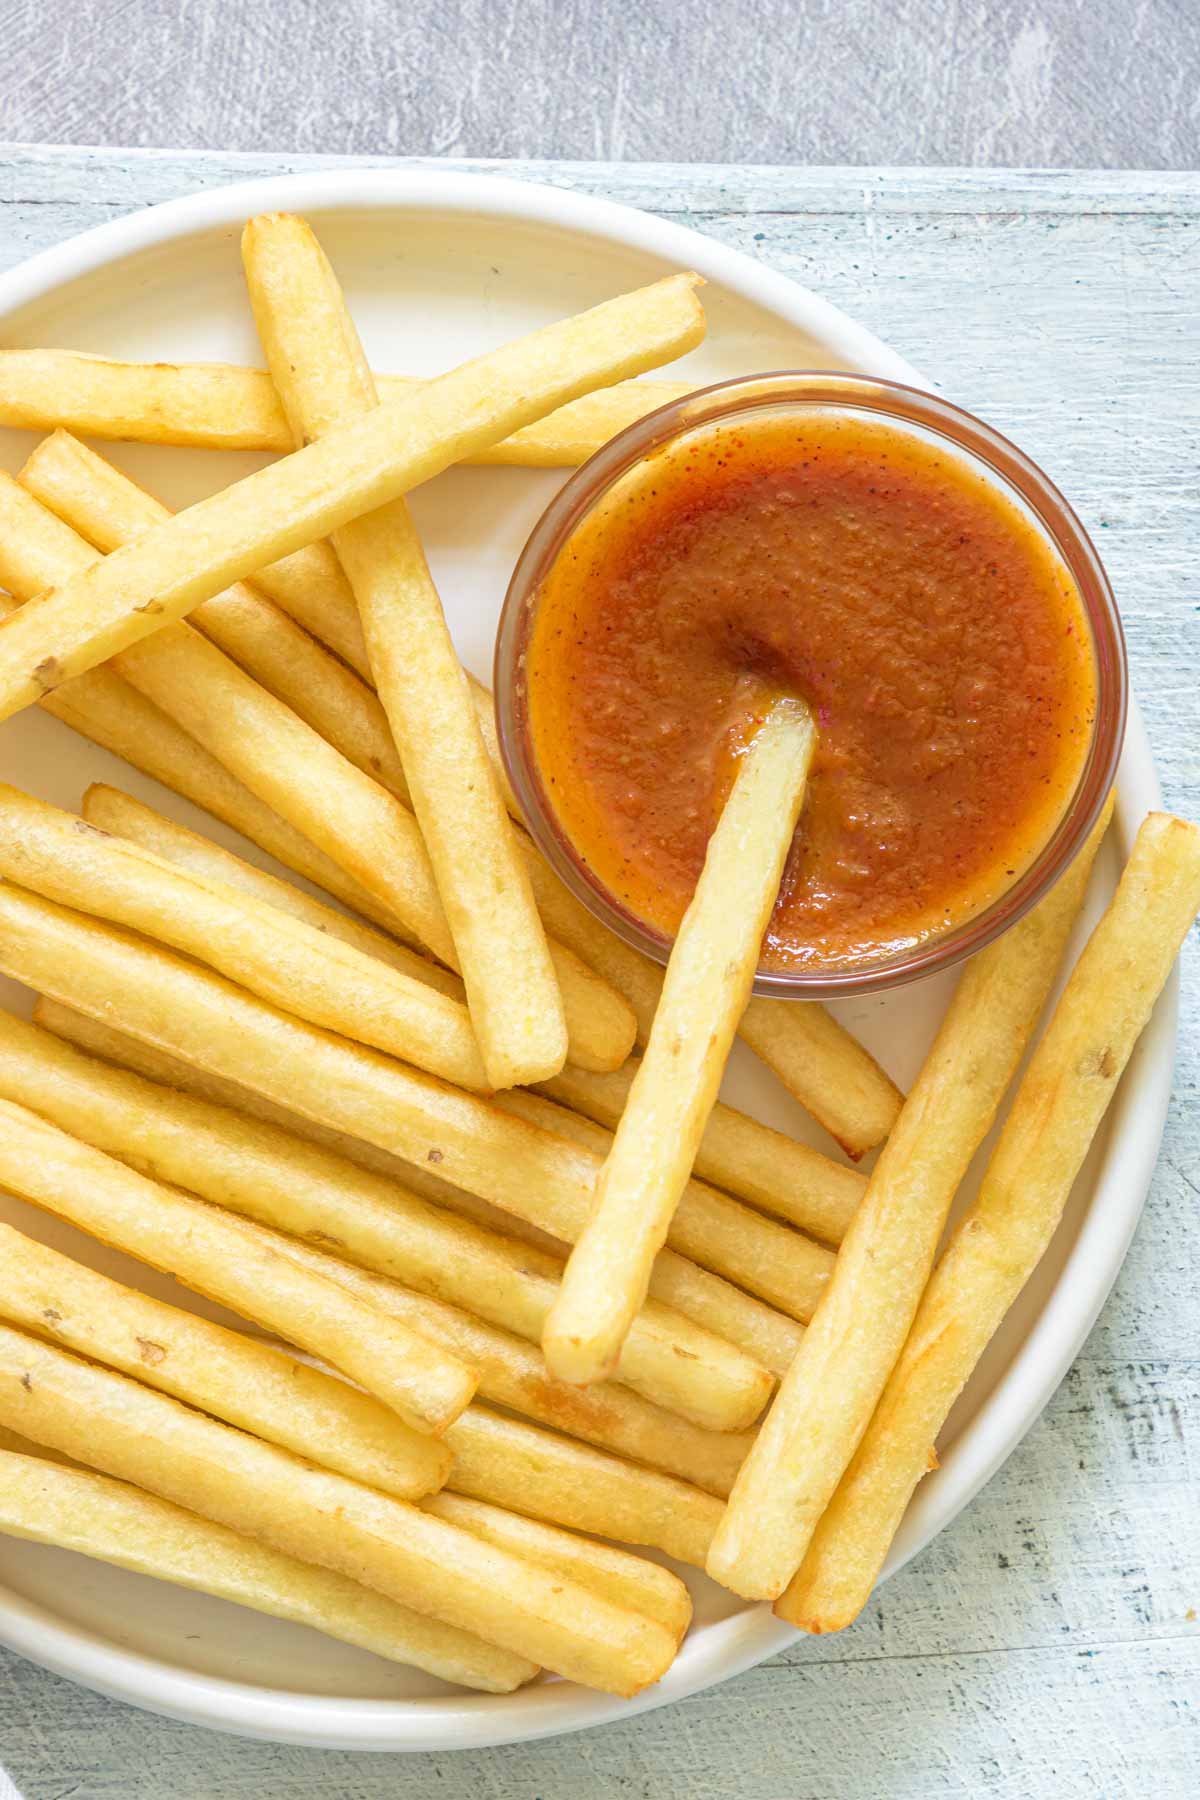 homemade ketchup in serving bowl, with some fries on a plate